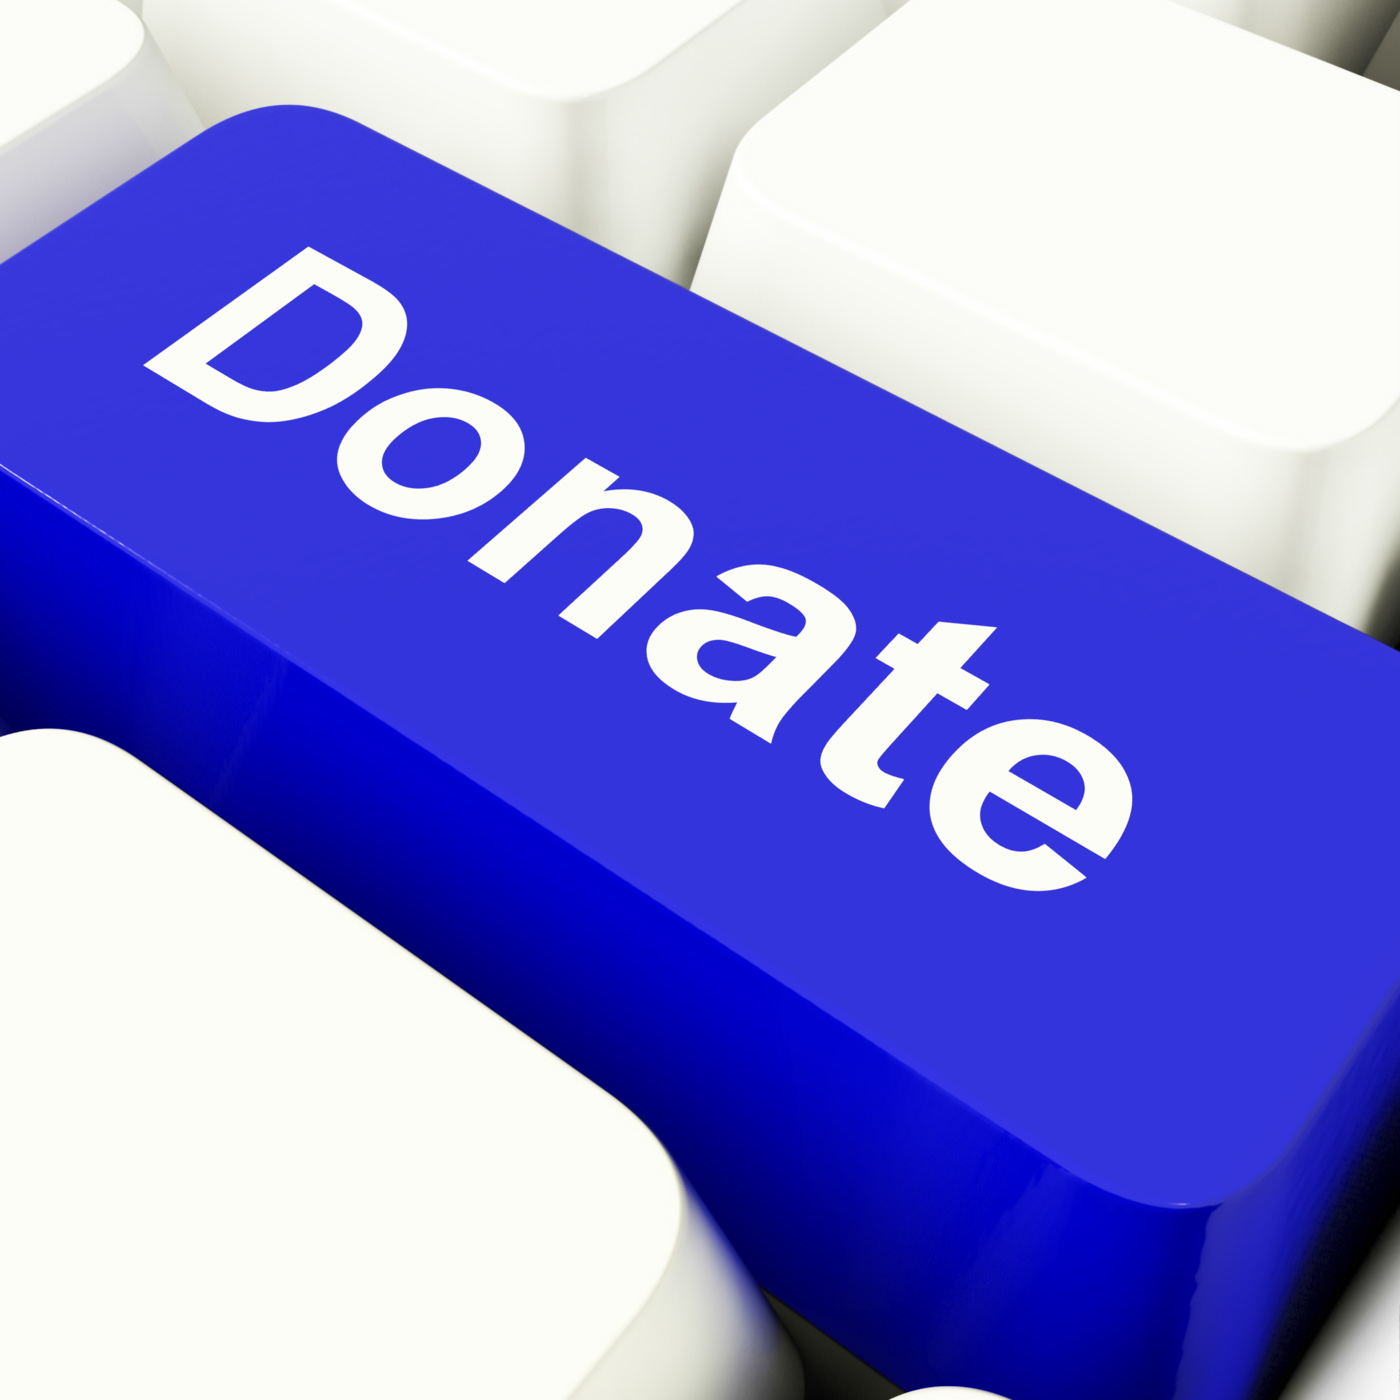 Donate computer key in blue showing charity and fundraising photo